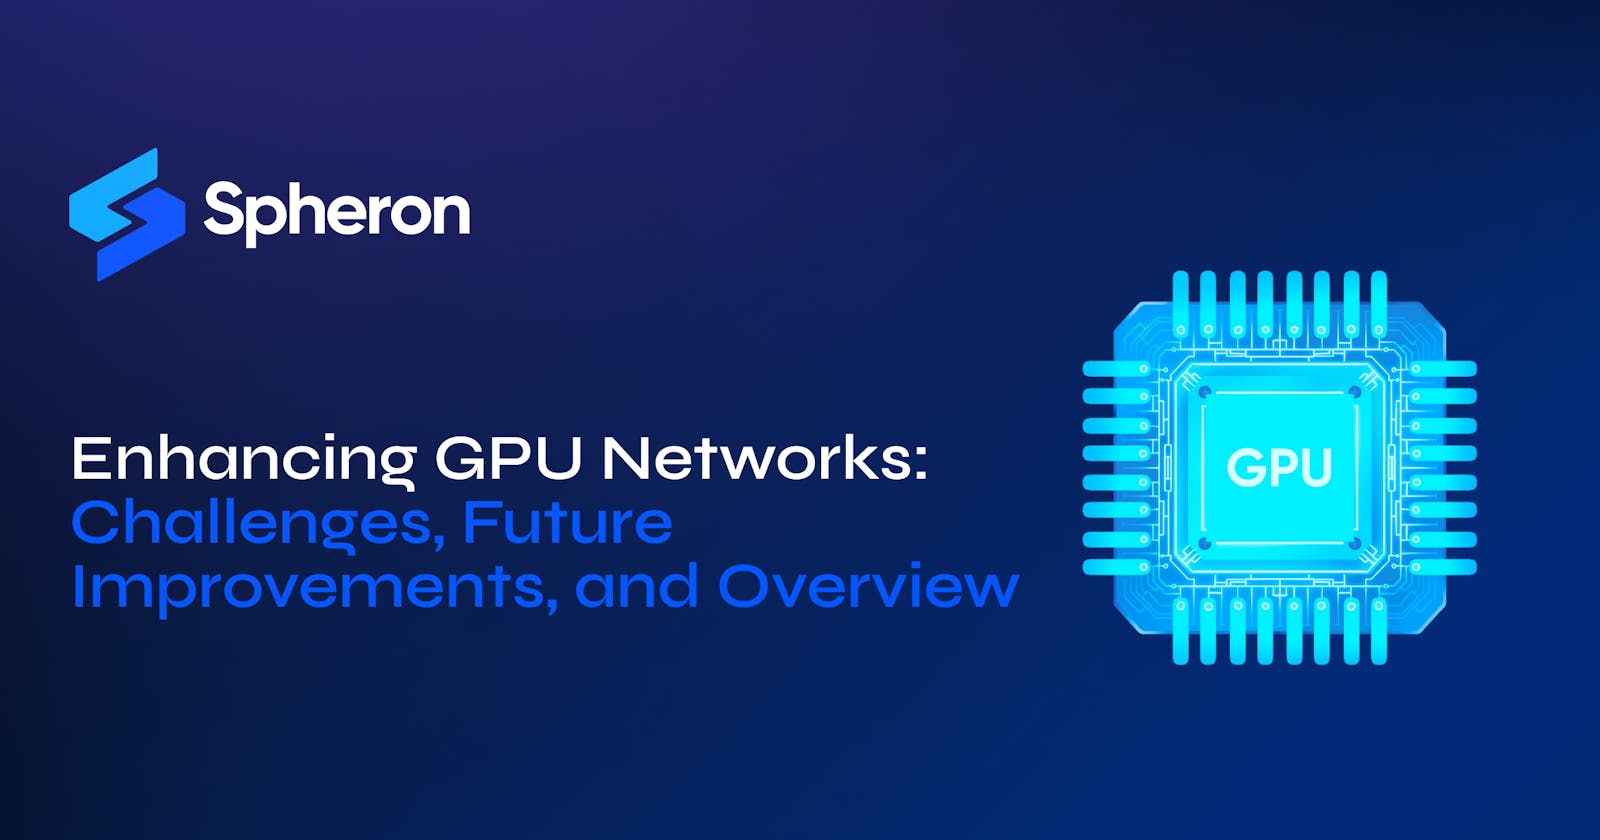 Enhancing GPU Networks: Challenges, Future Improvements, and Overview